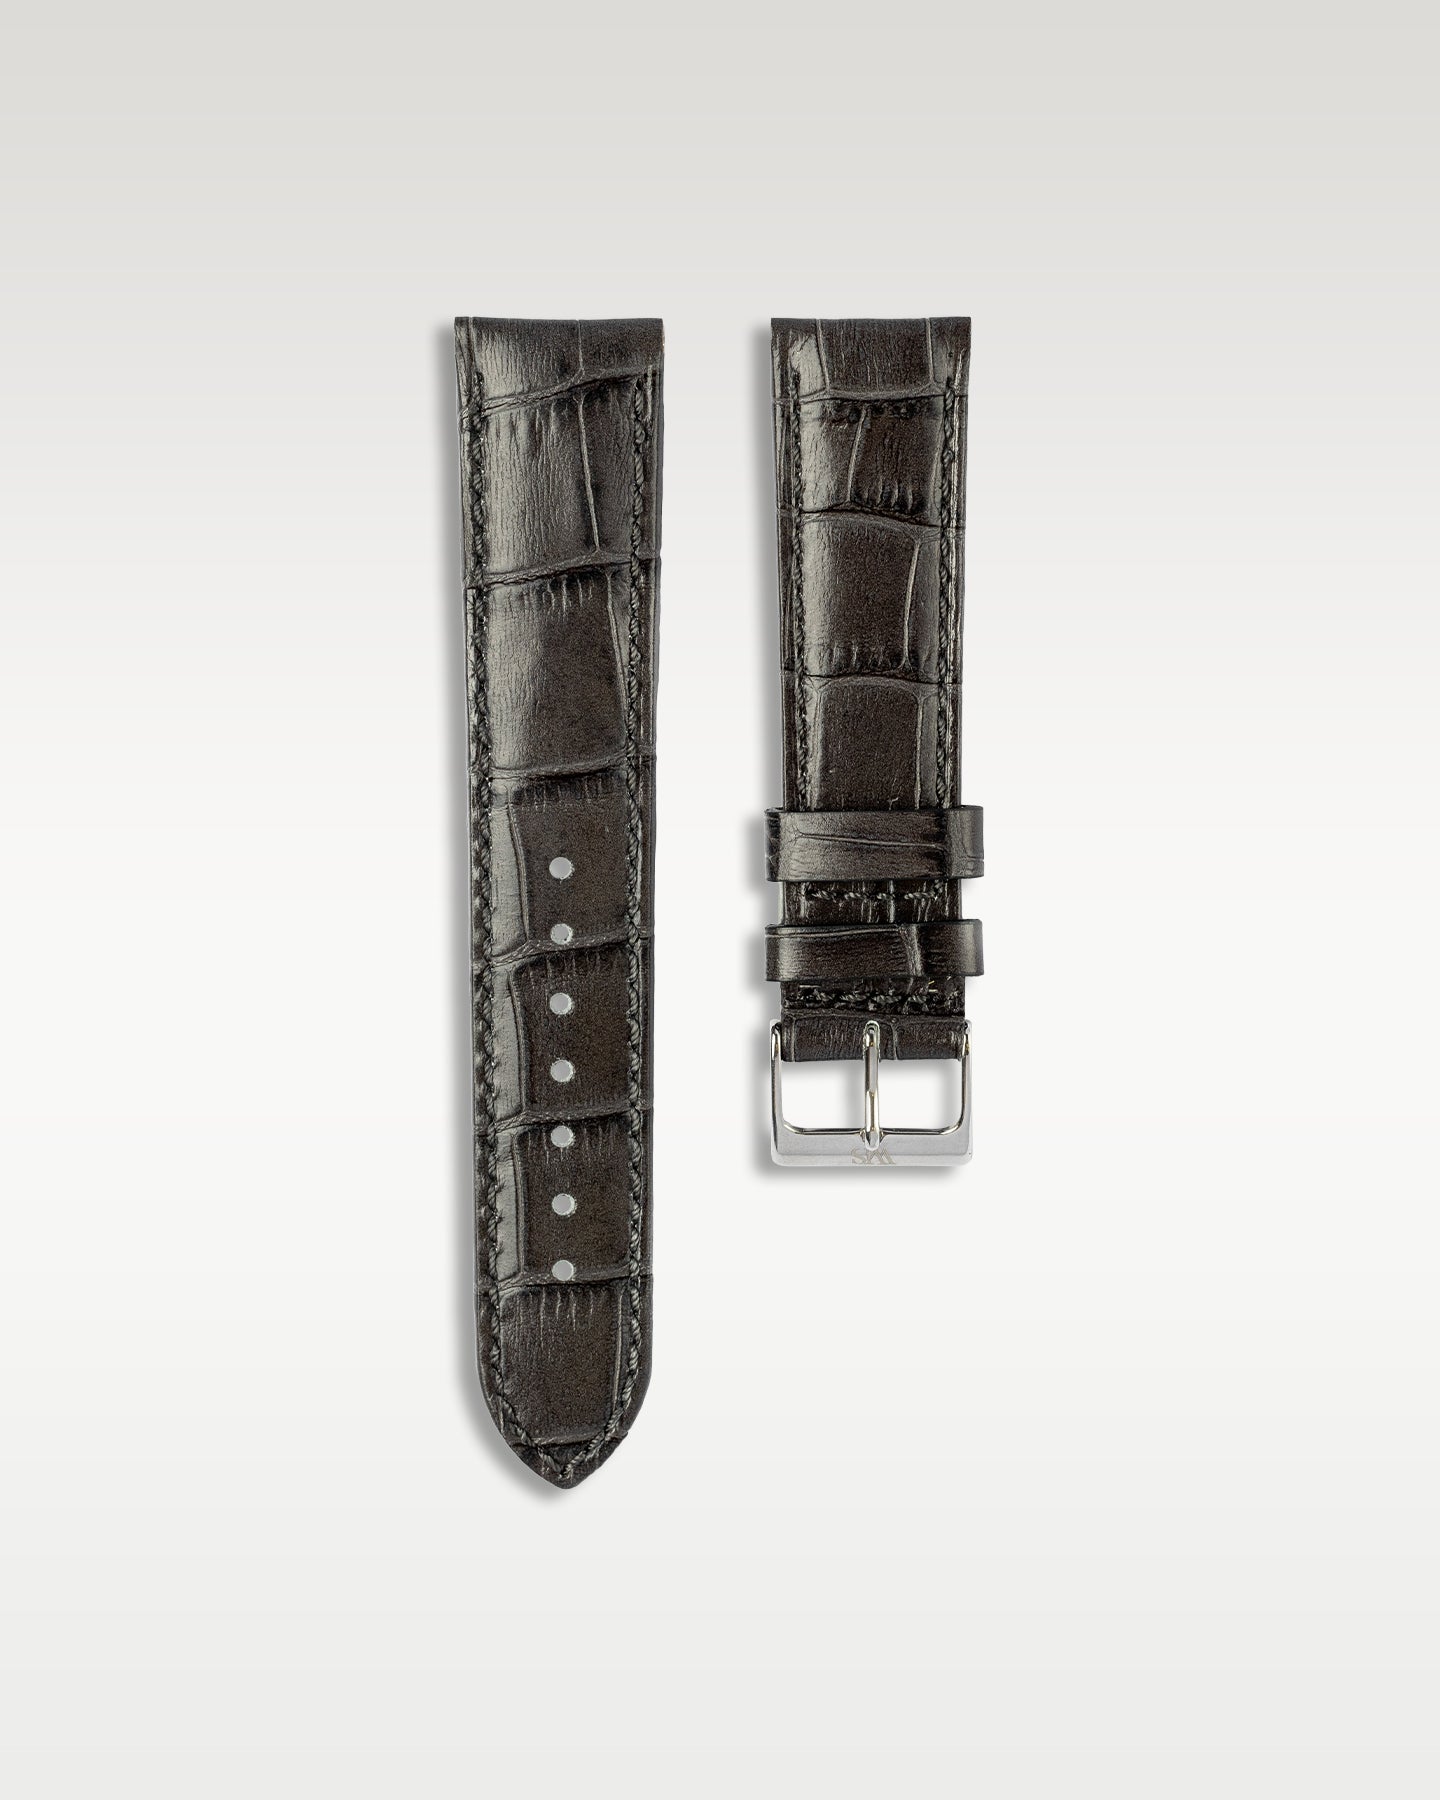 Handmade Alligator Leather Strap in Charcoal Grey